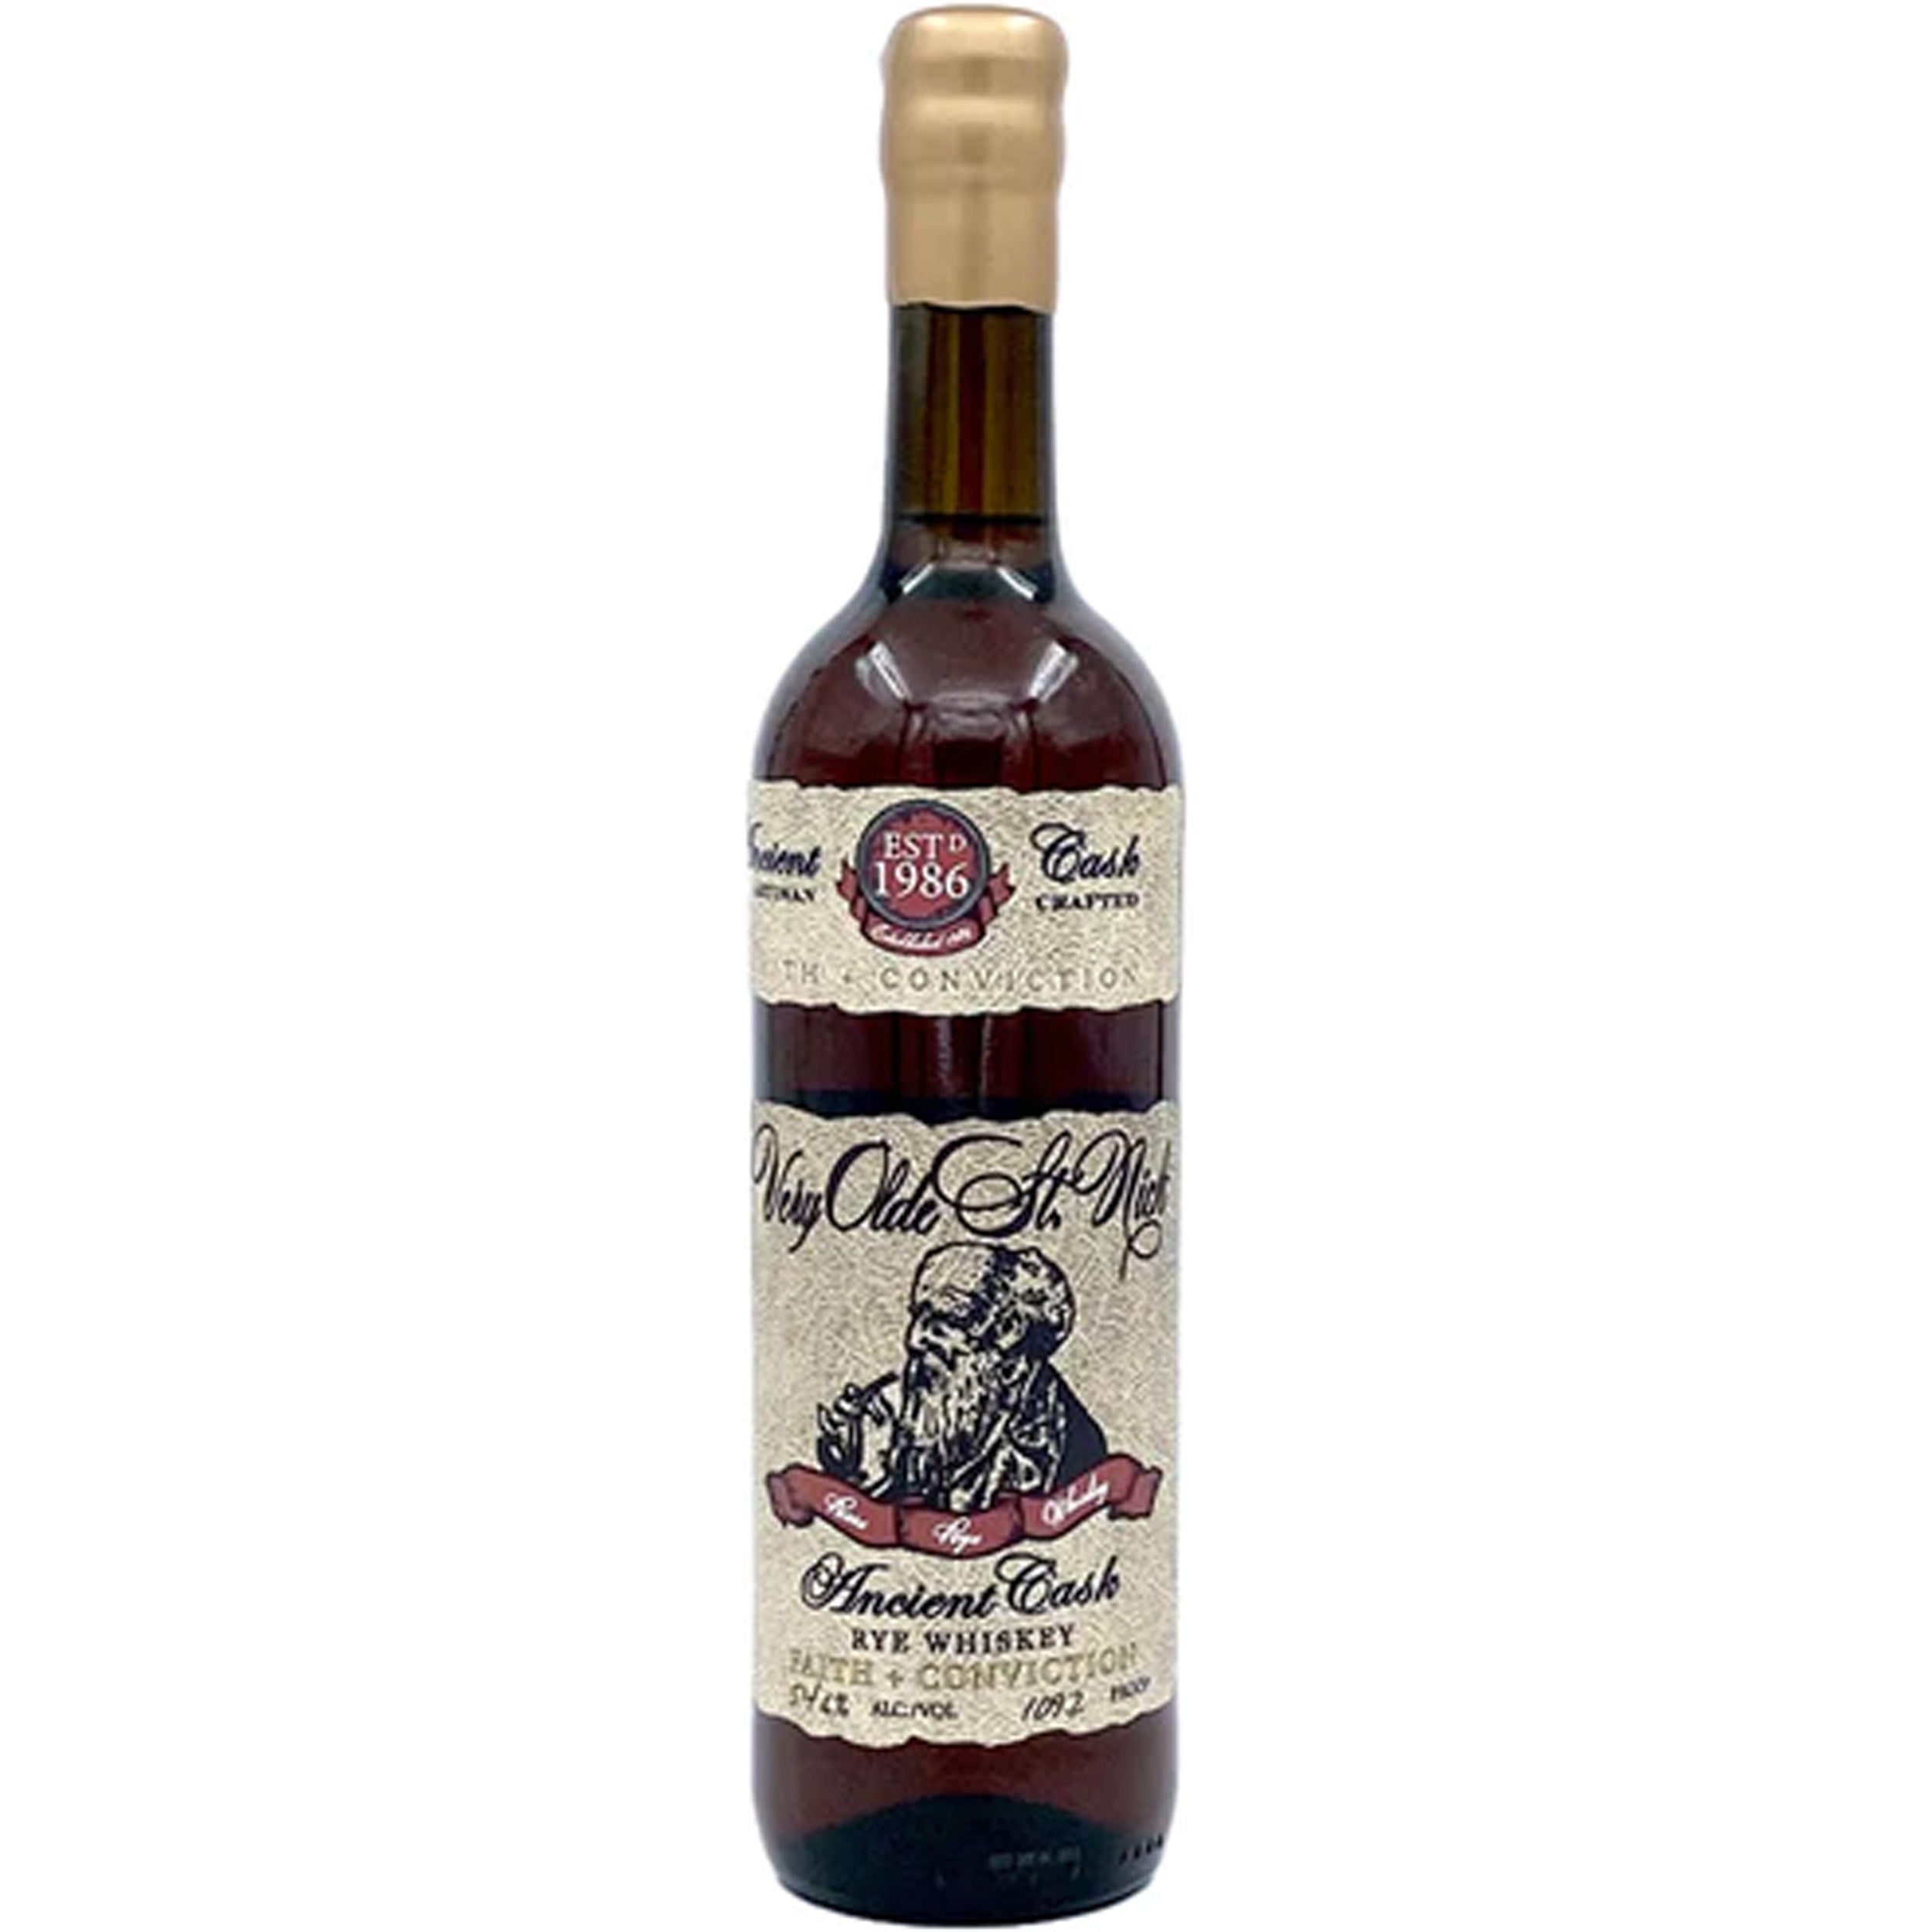 Very Olde St. Nick 'Faith + Conviction' Ancient Cask Rye Whiskey